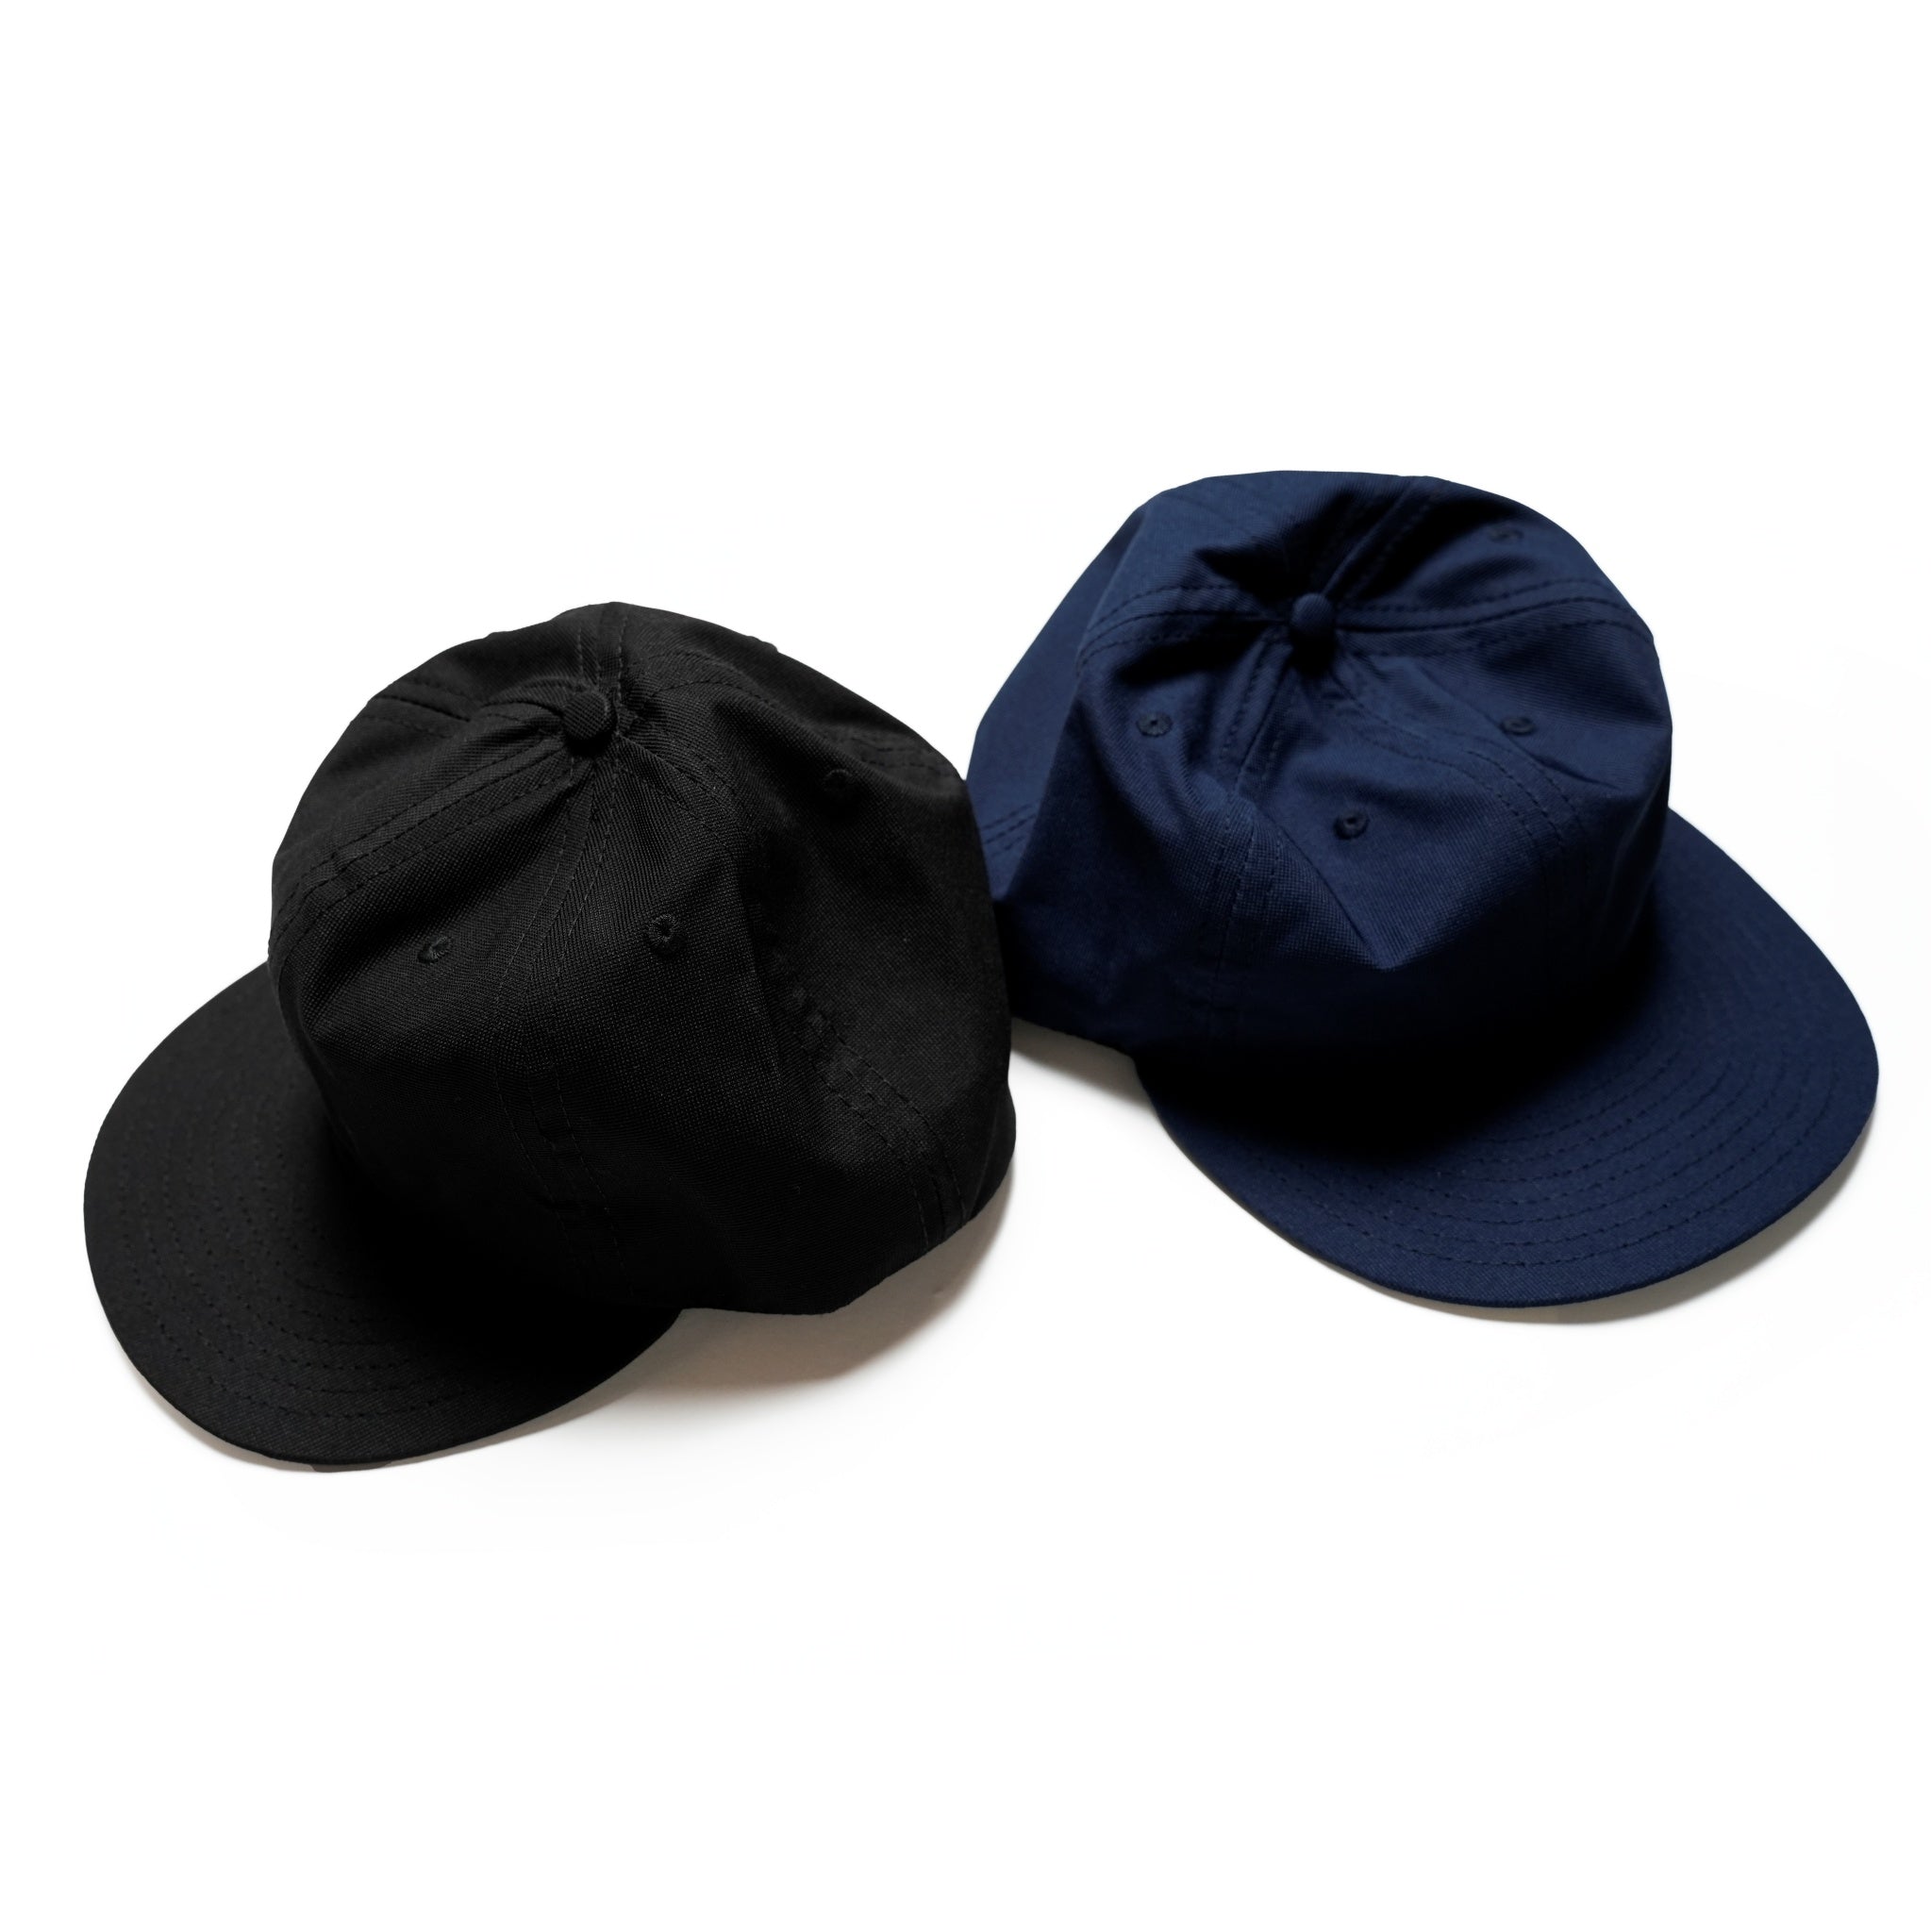 No:cstm04 | Name:Classic 6 Panels B. B. | Color:#Black,#Navy | Size:Free | 【Smoke T One】【ONE CS FITS ALL】